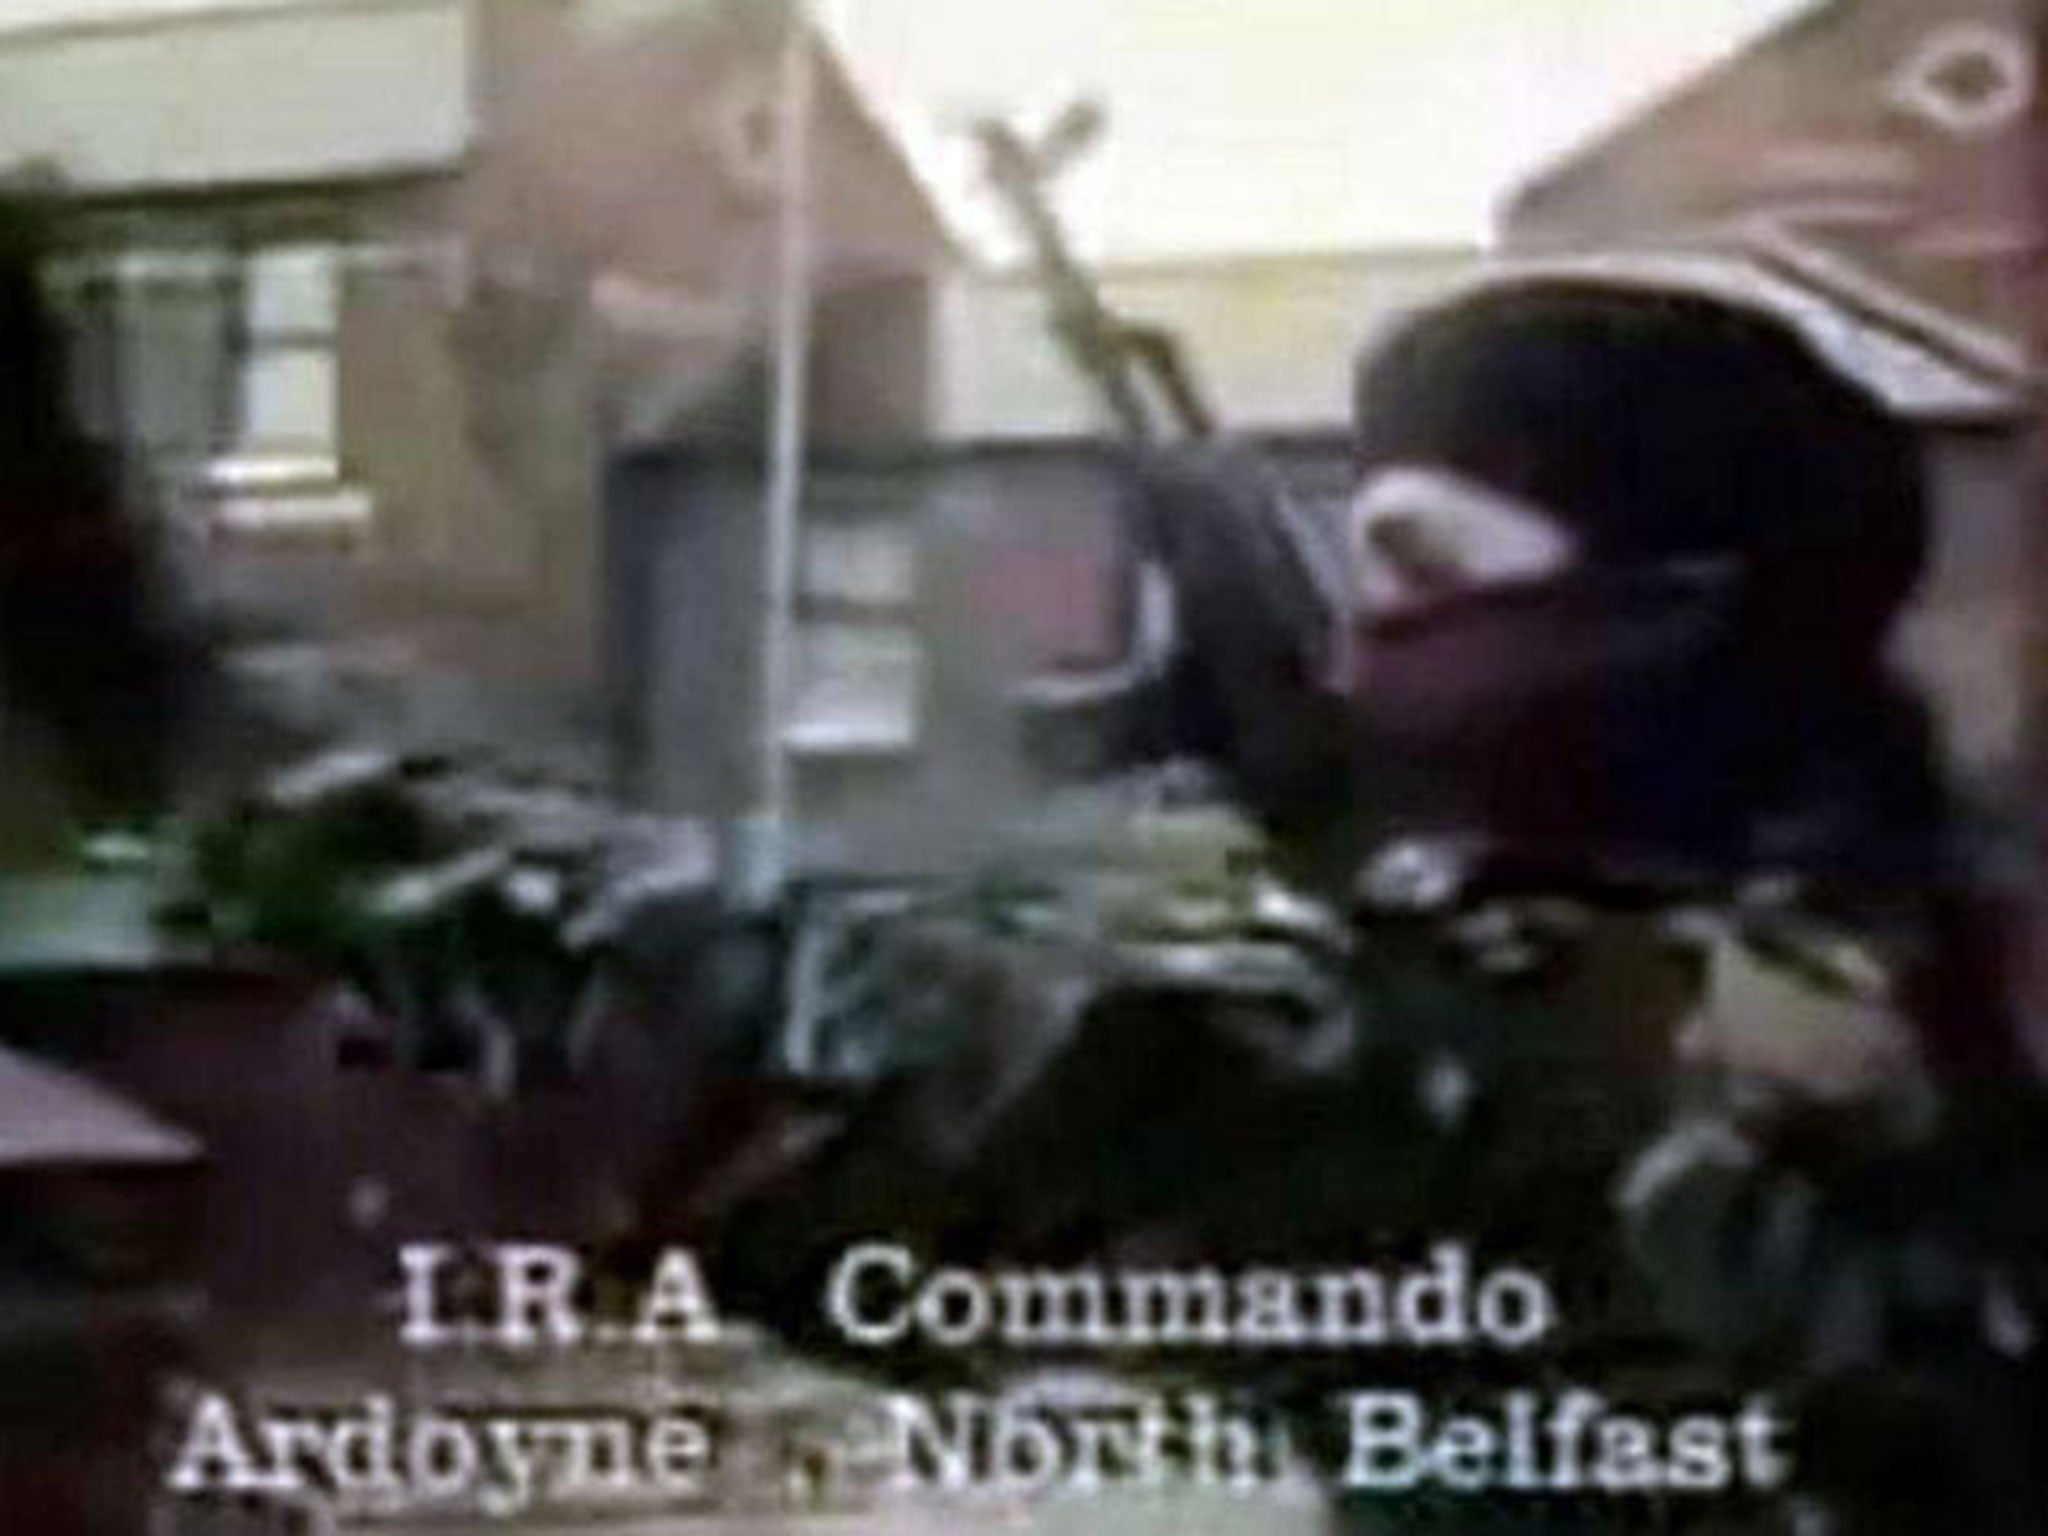 The IRA commander in Ardoyne was known to the British as ‘AA’. He is seen here in a propaganda video in the late 80s